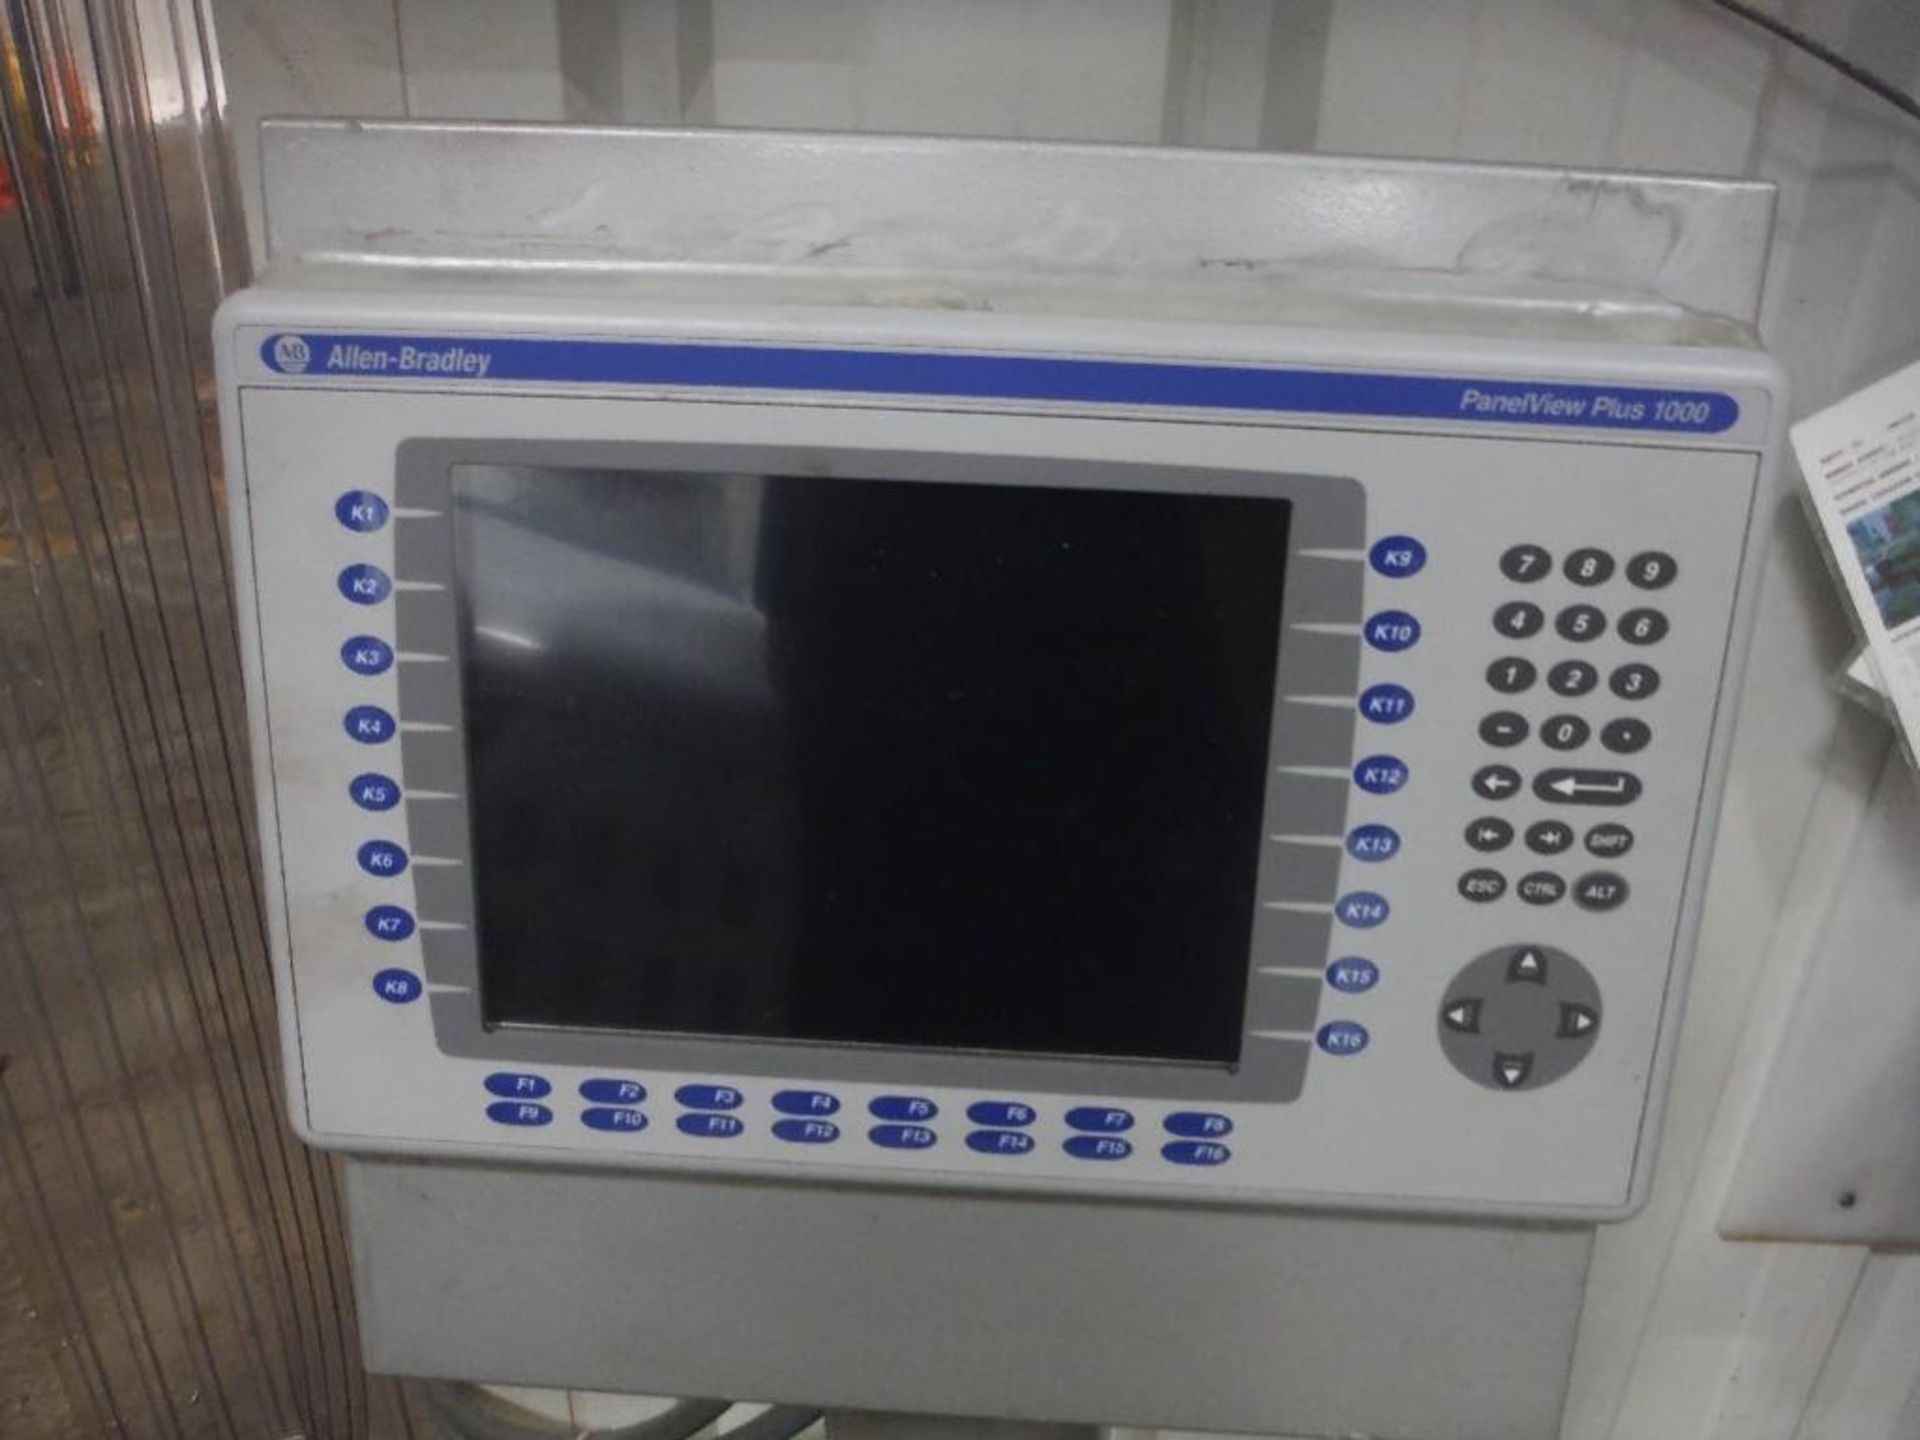 Strong arm cabinet with Allen Bradley panelview plus 1000 - Rigging Fee: $100 - Image 2 of 3